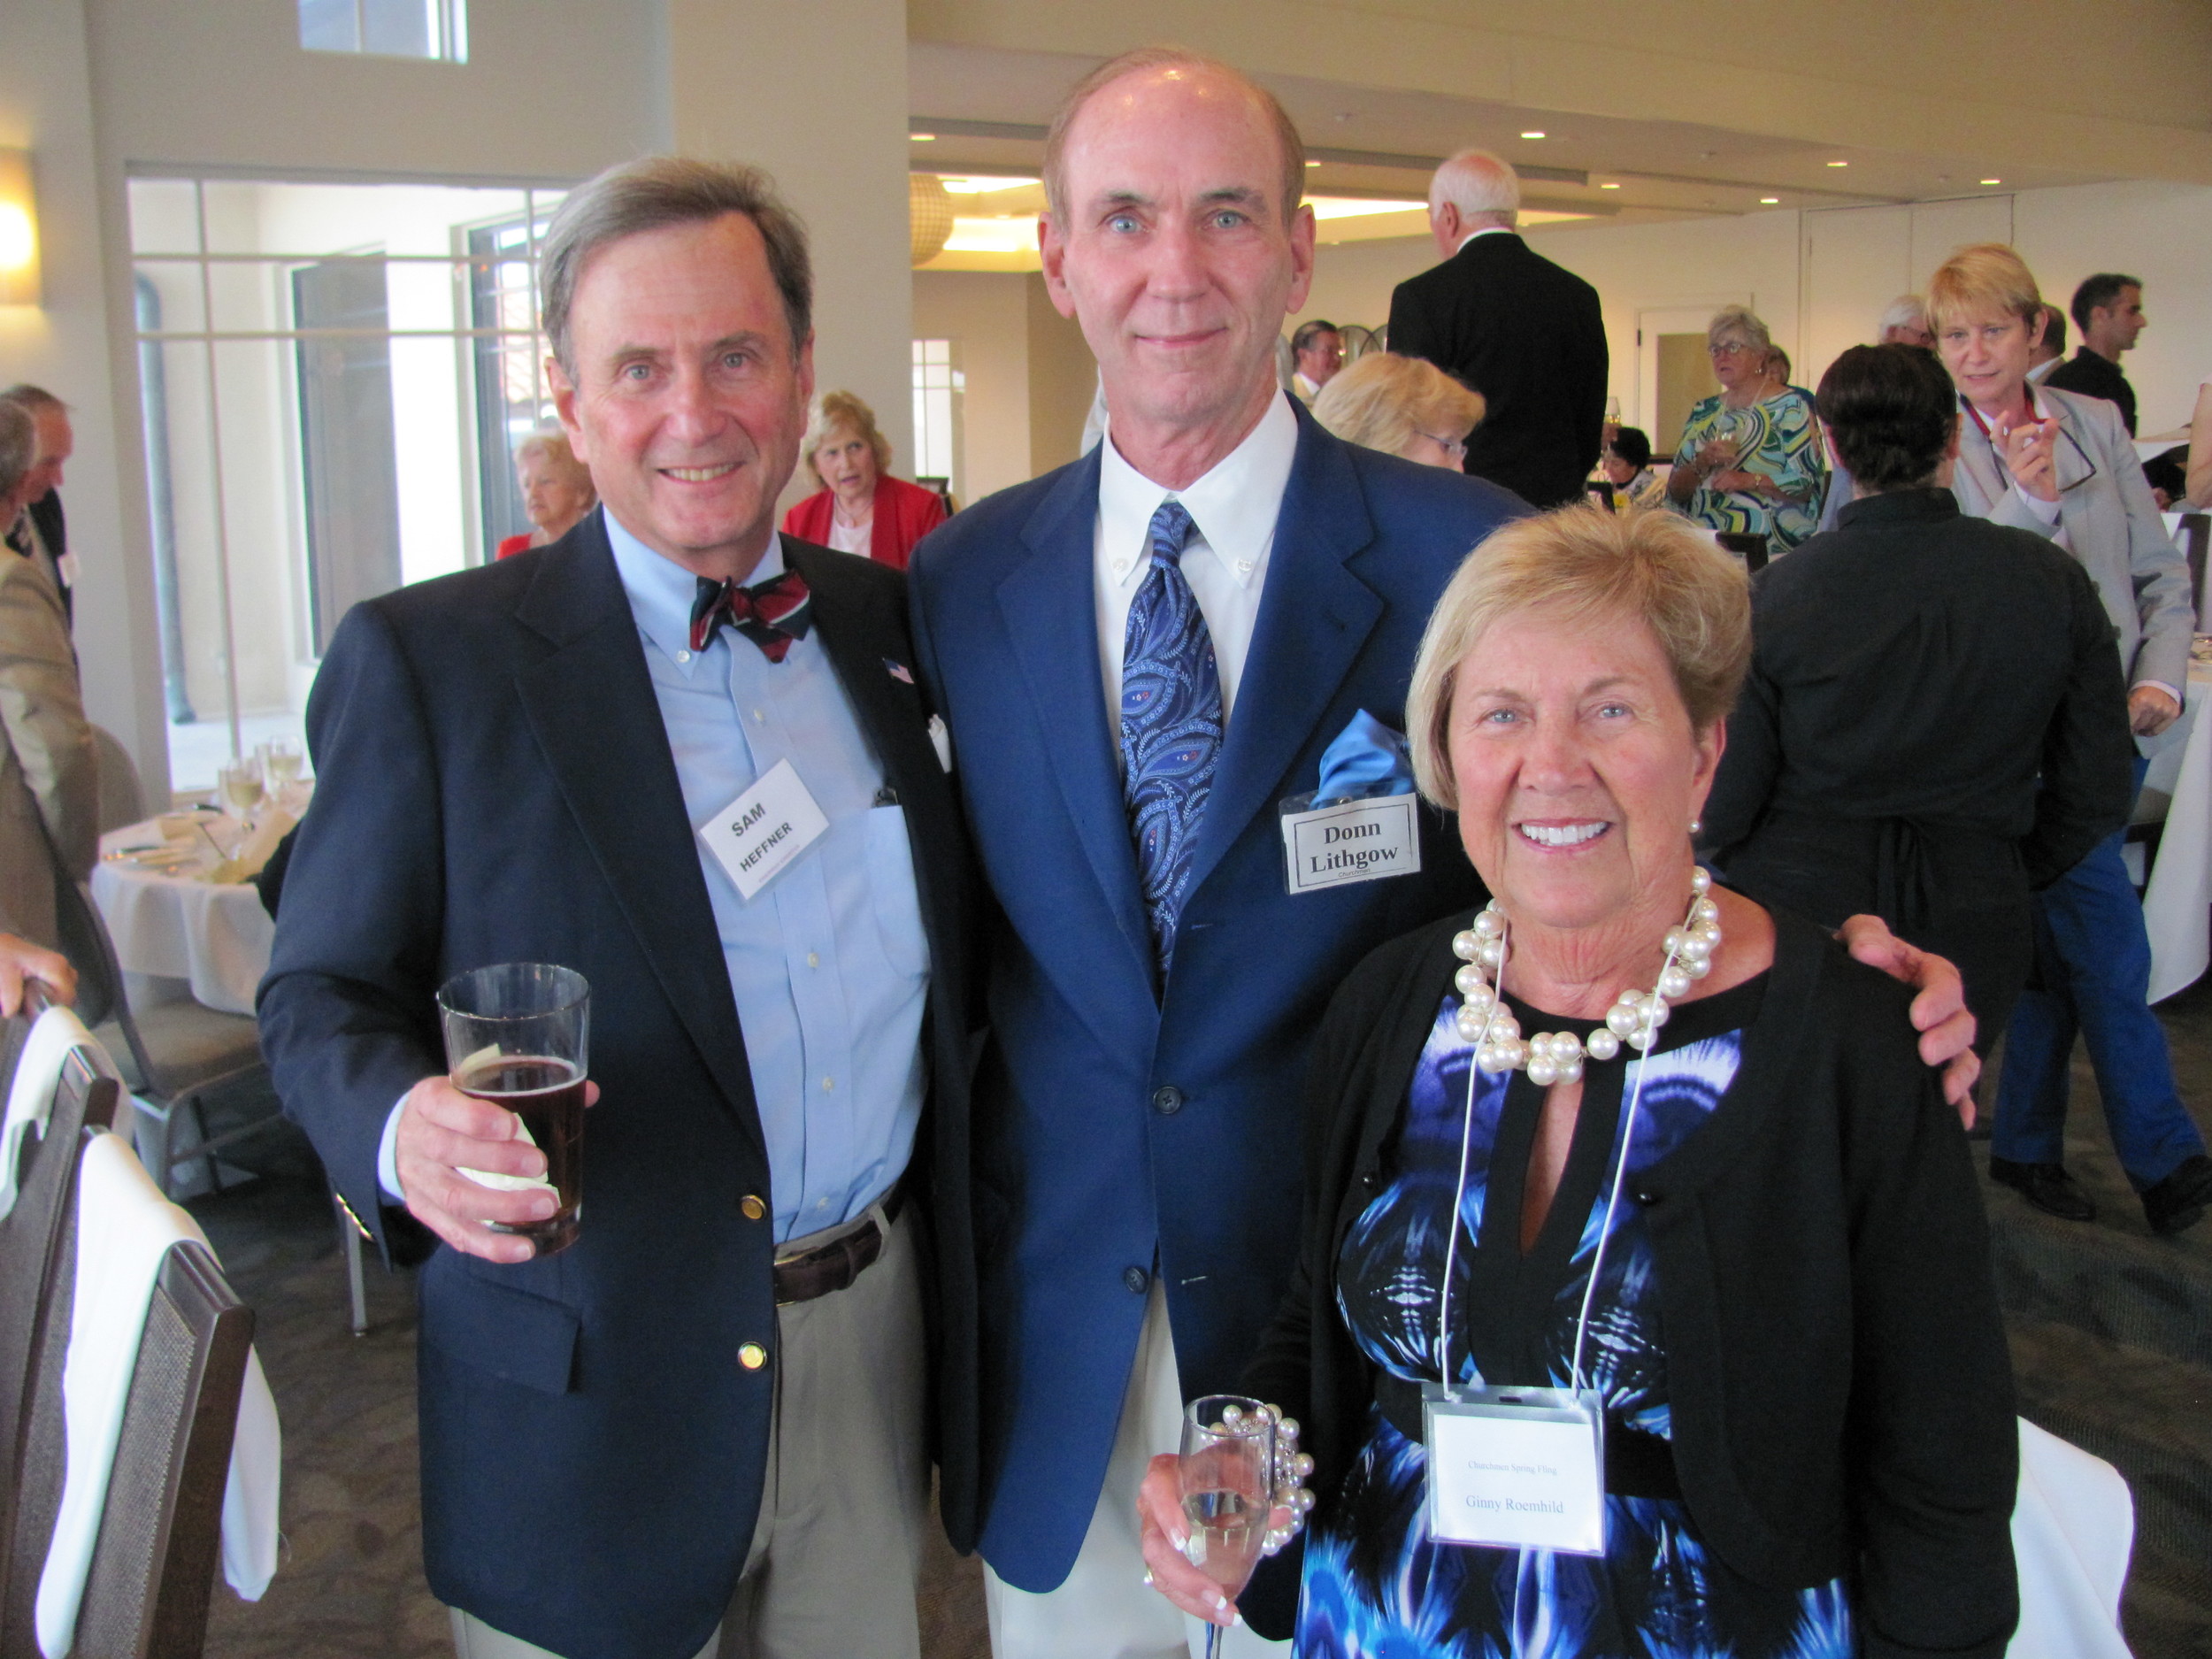 Sam Heffner, Donn Lithgow and Ginny Roemhild